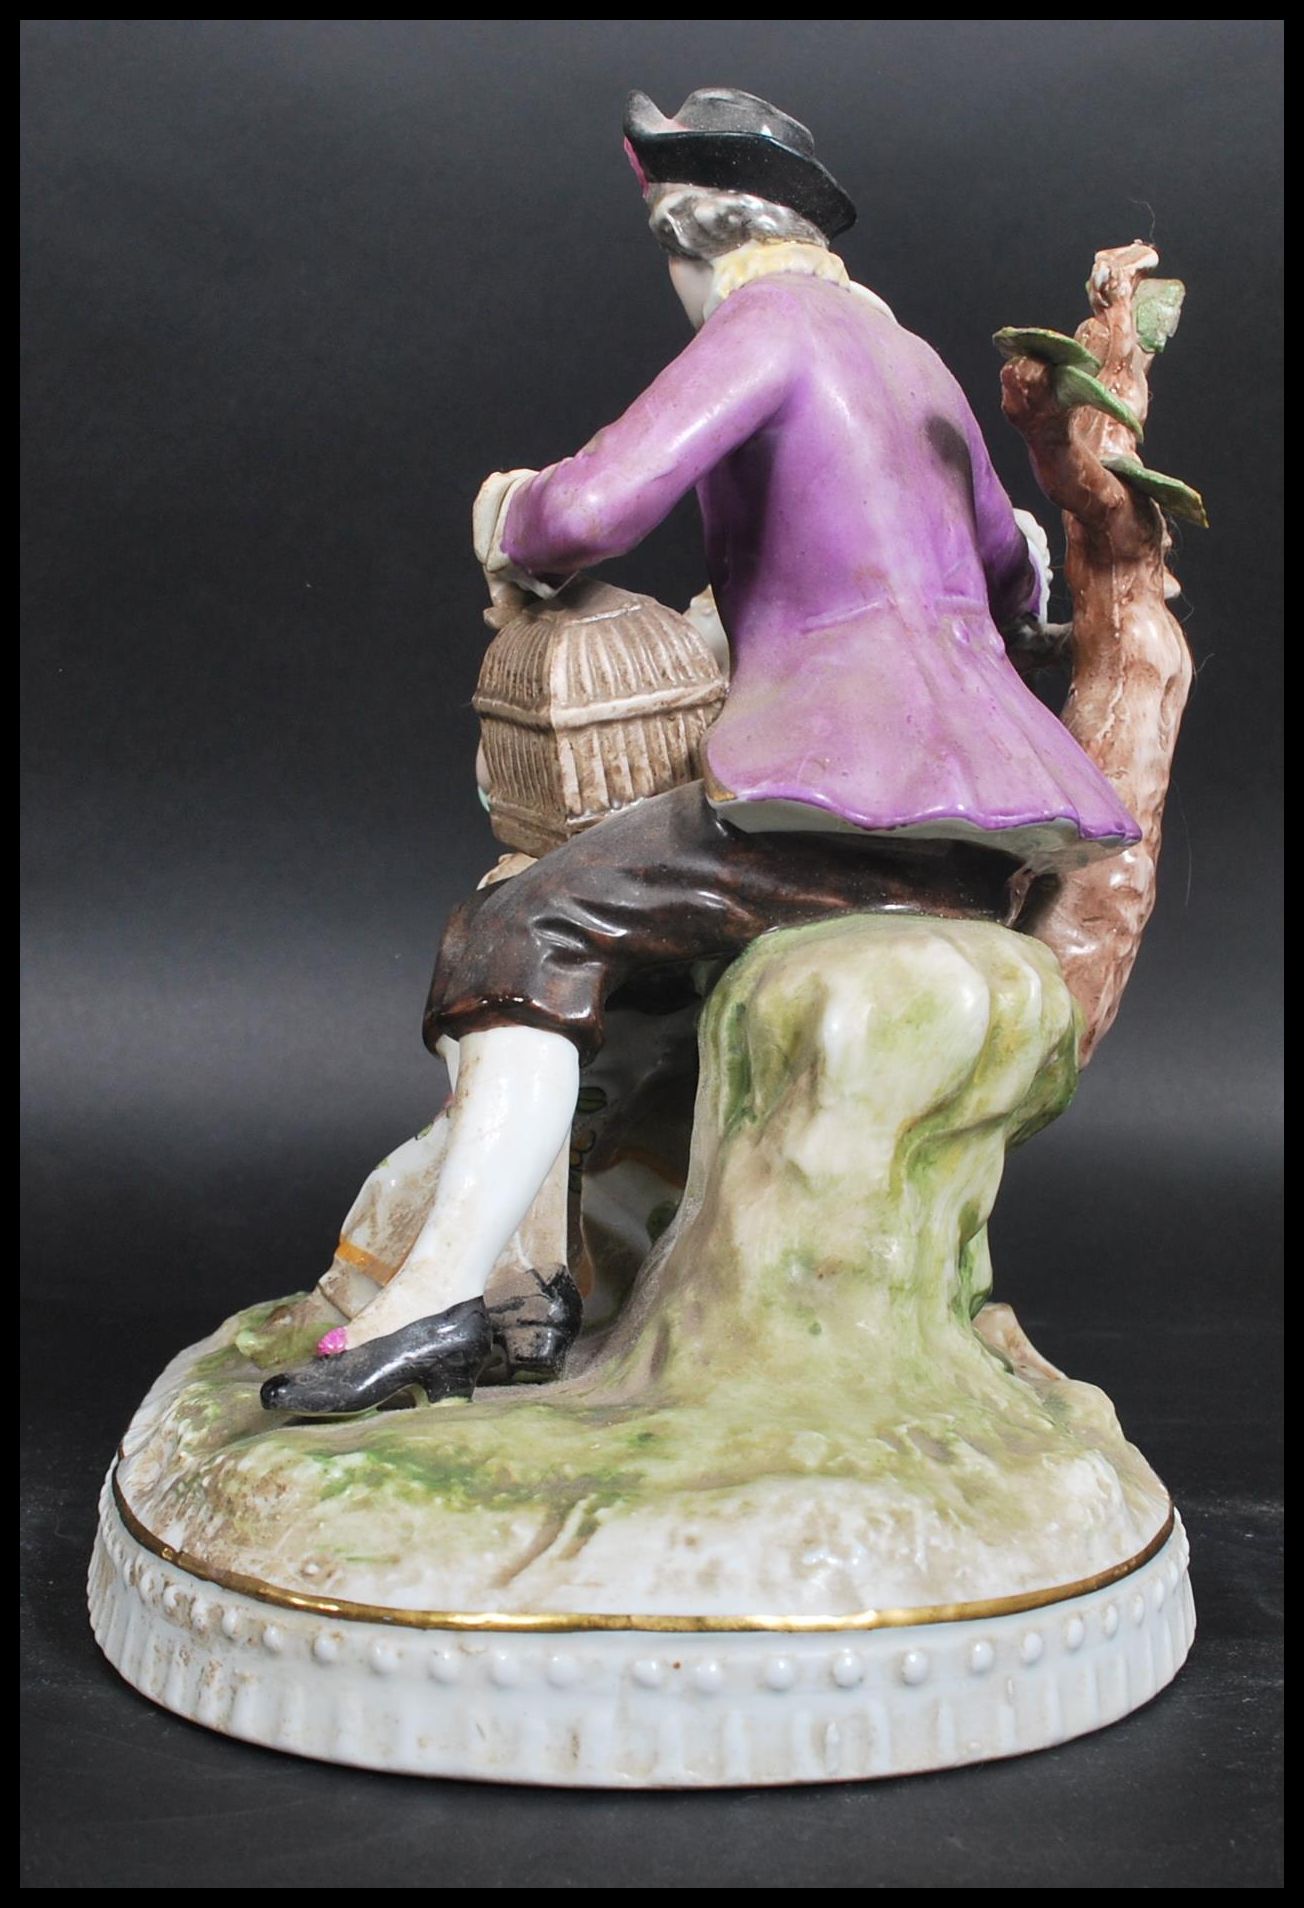 A 19th century Wilhelm Rittirsch German diorama figure group. The figurine depicting a family with - Image 3 of 9